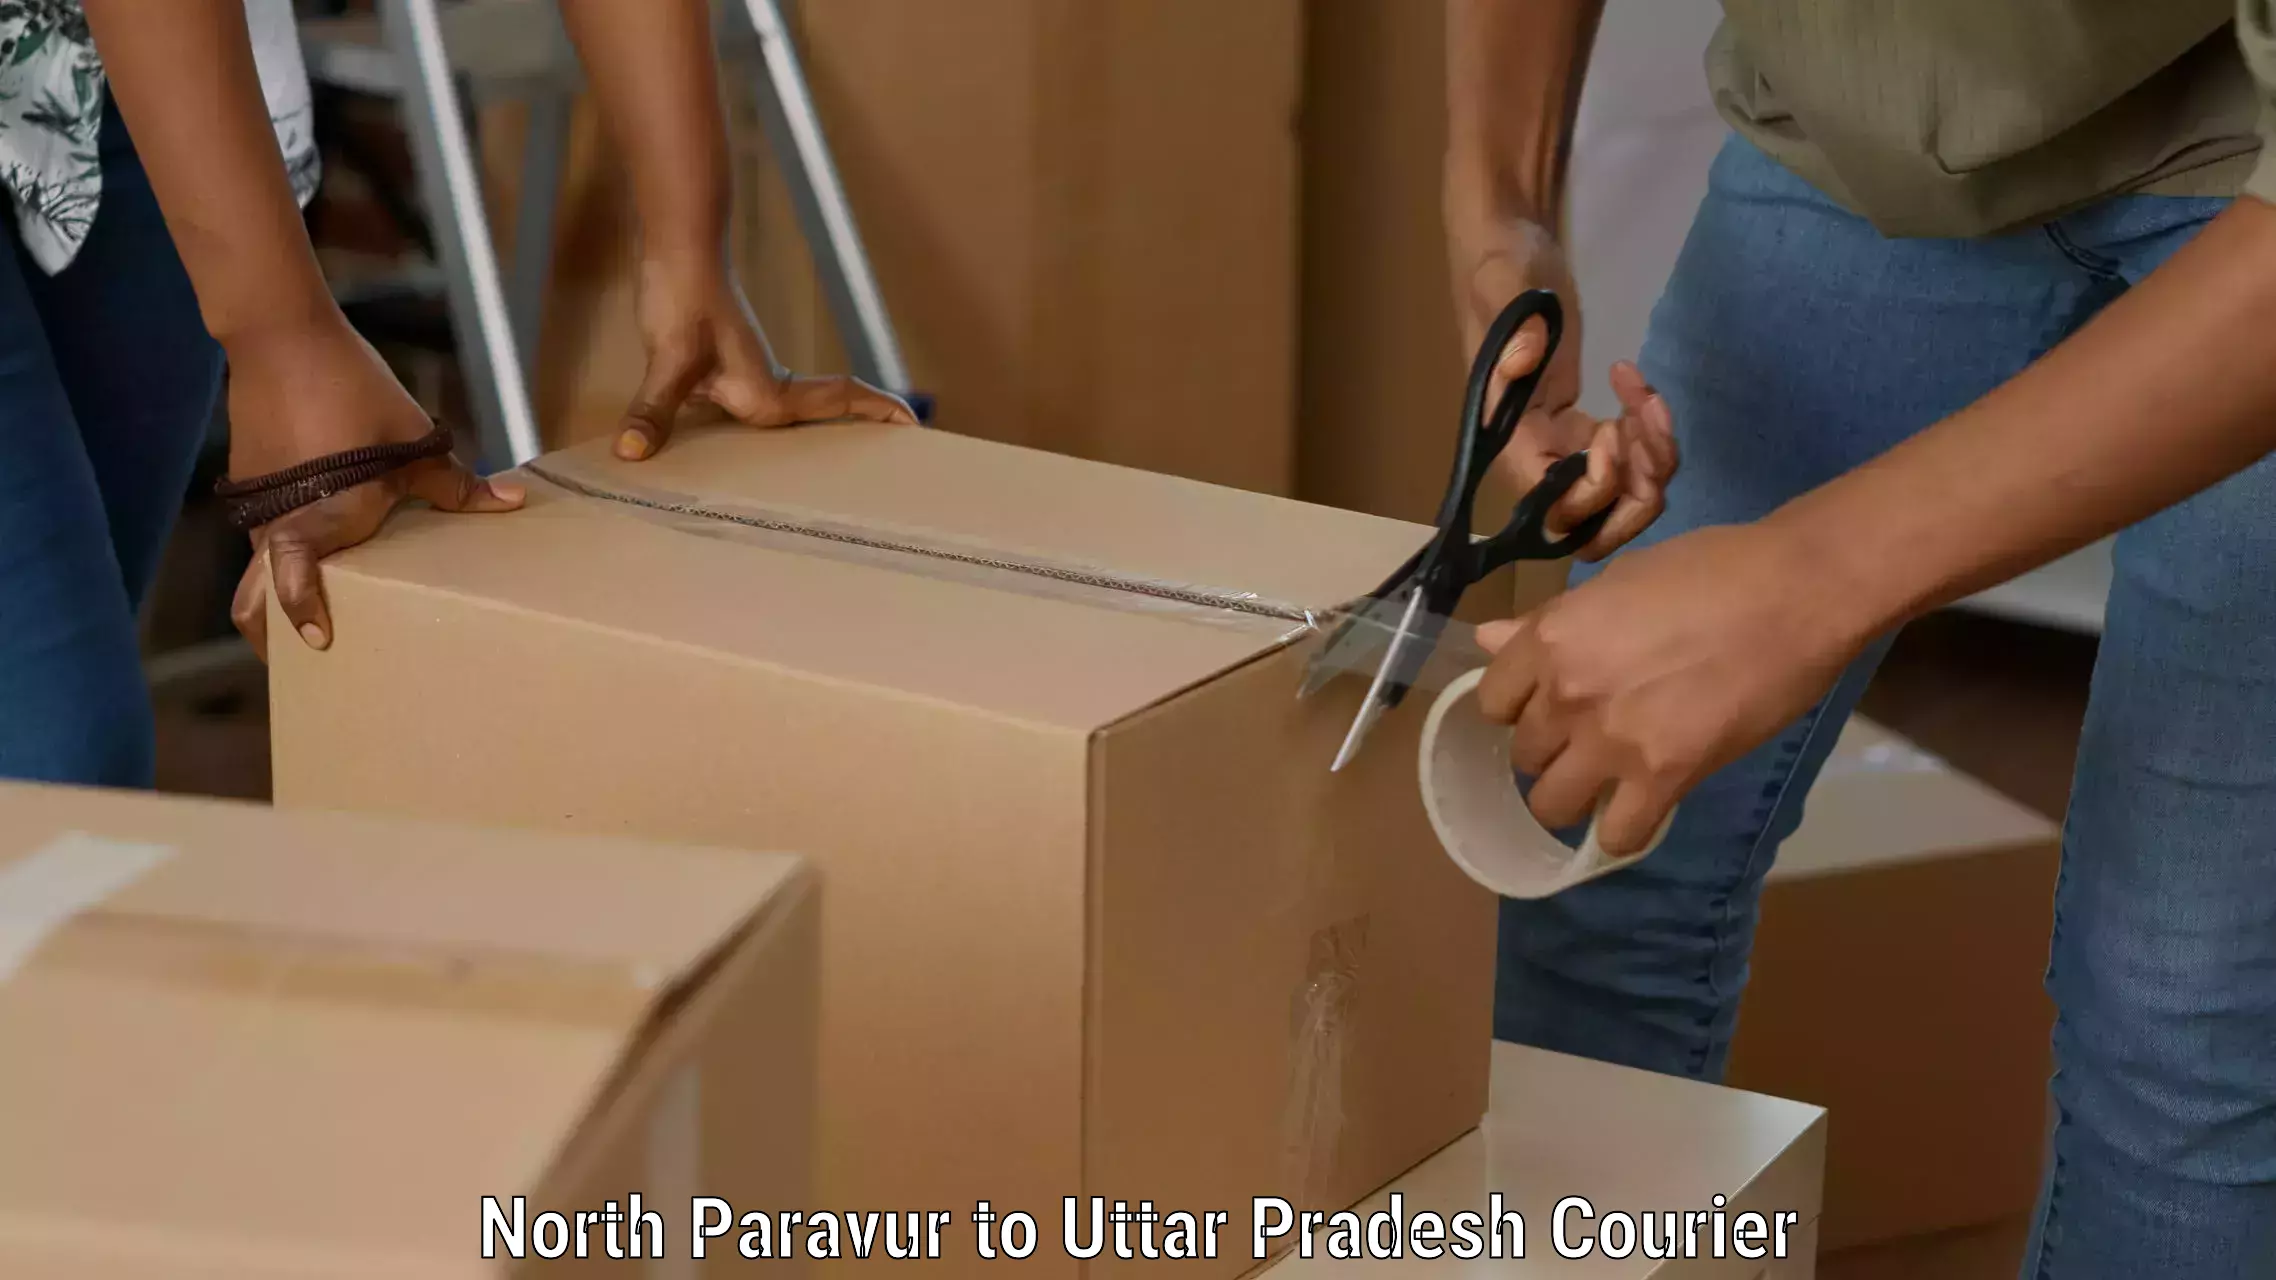 Courier service innovation North Paravur to Chakia Chandauli